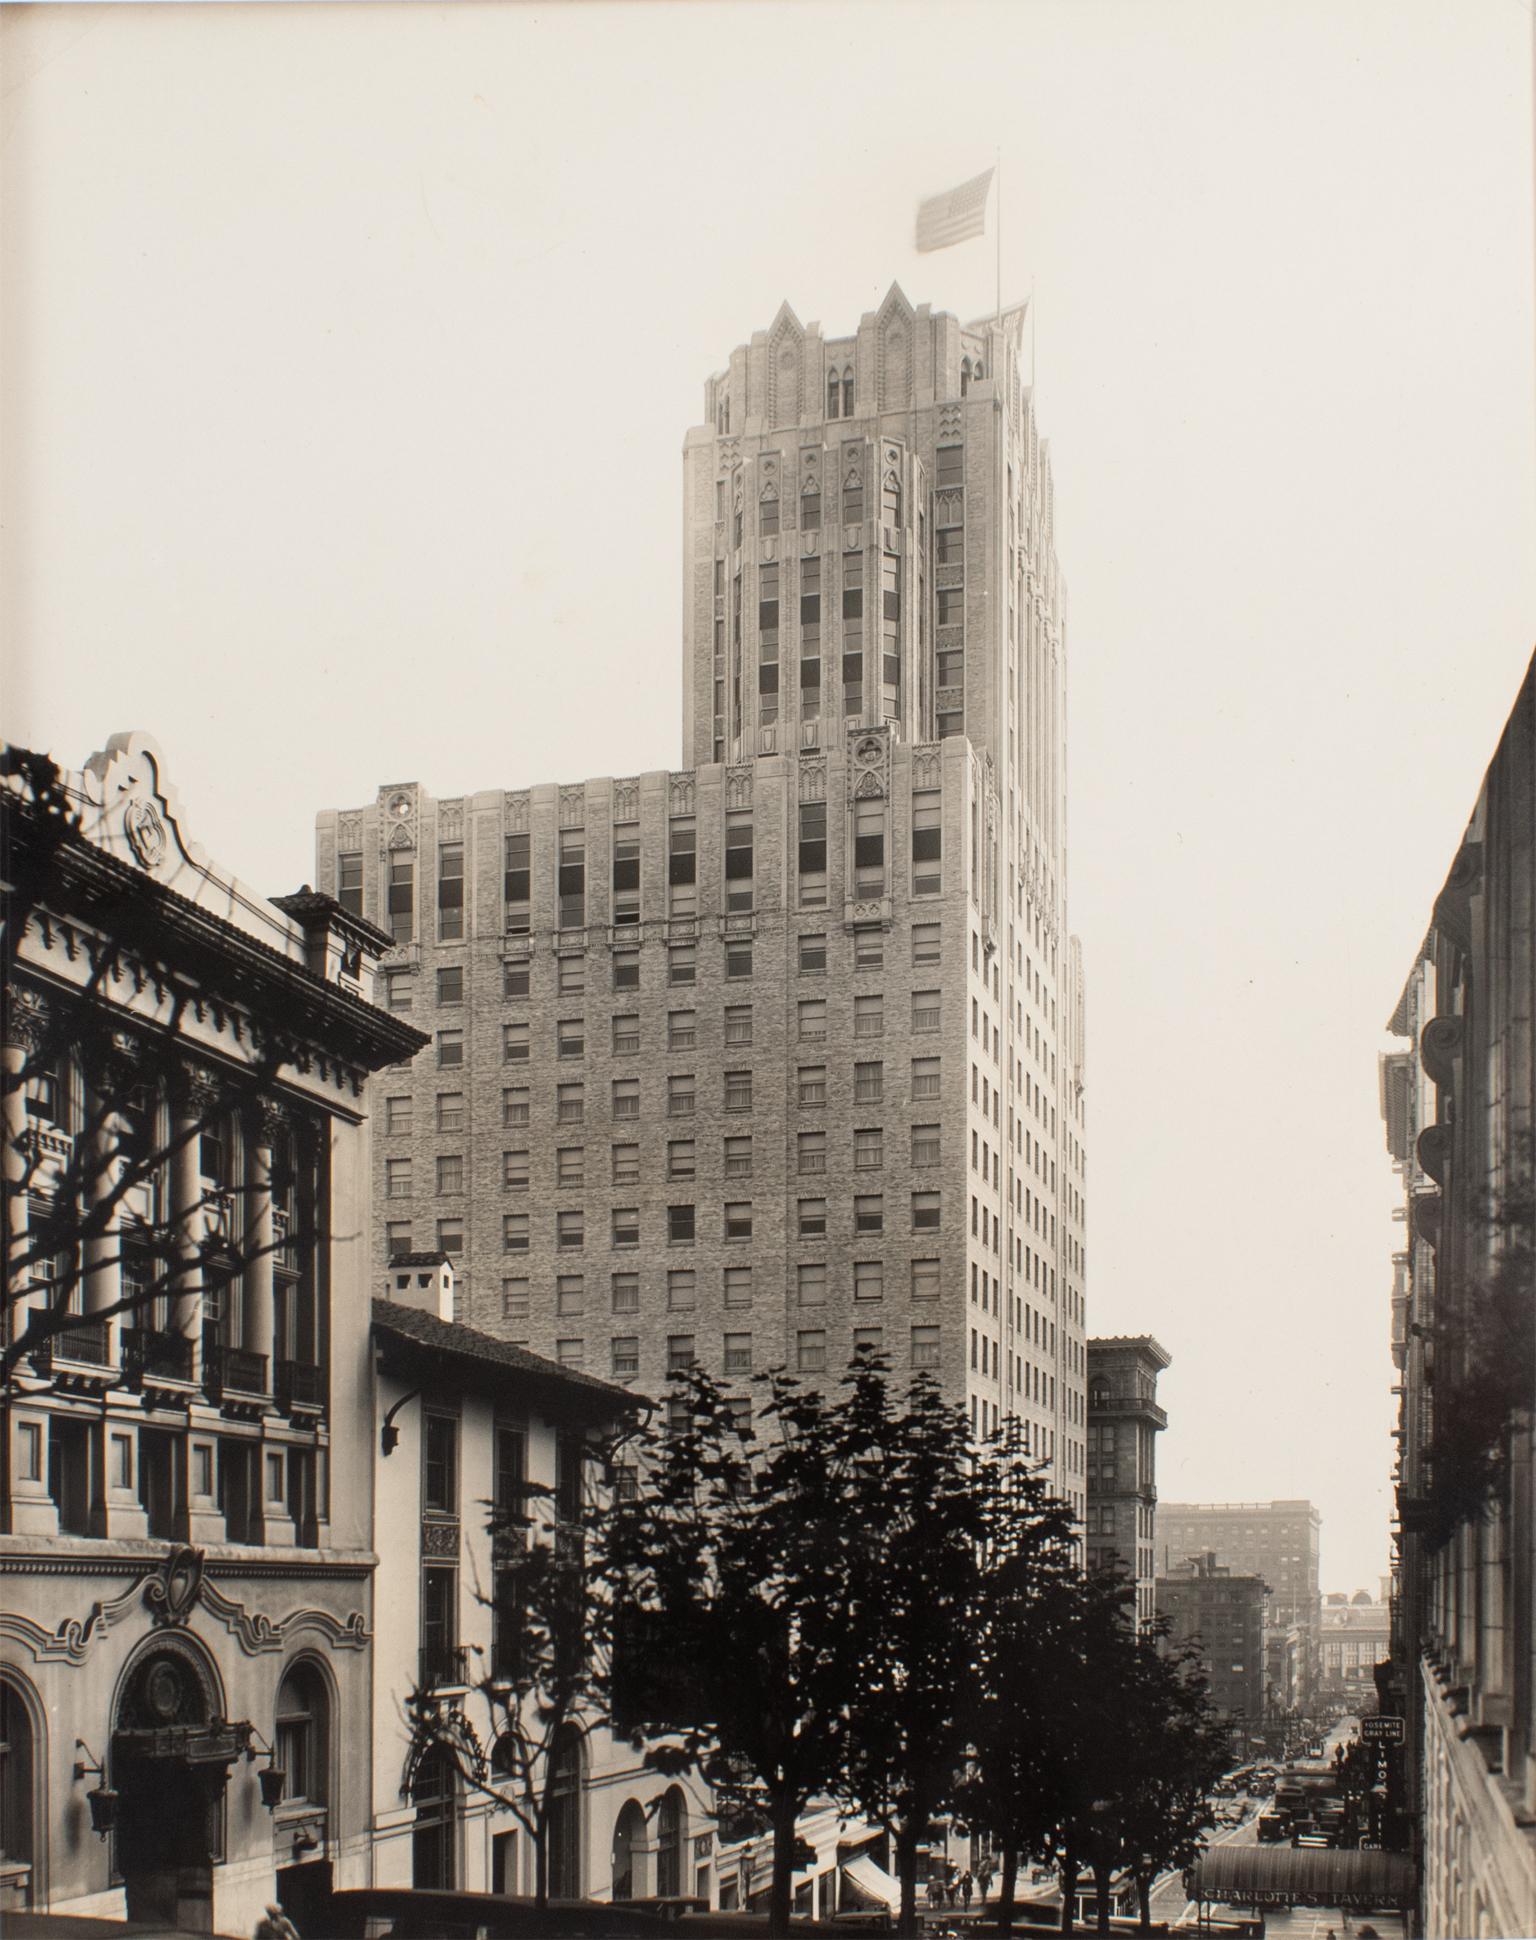 An original silver gelatin black and white photograph by Ralph Young Studios, San Francisco. View of the Sir Francis Drake Hotel building in 1930.
Features:
Original silver gelatin print photography unframed.
Commercial photography.
Photographer: